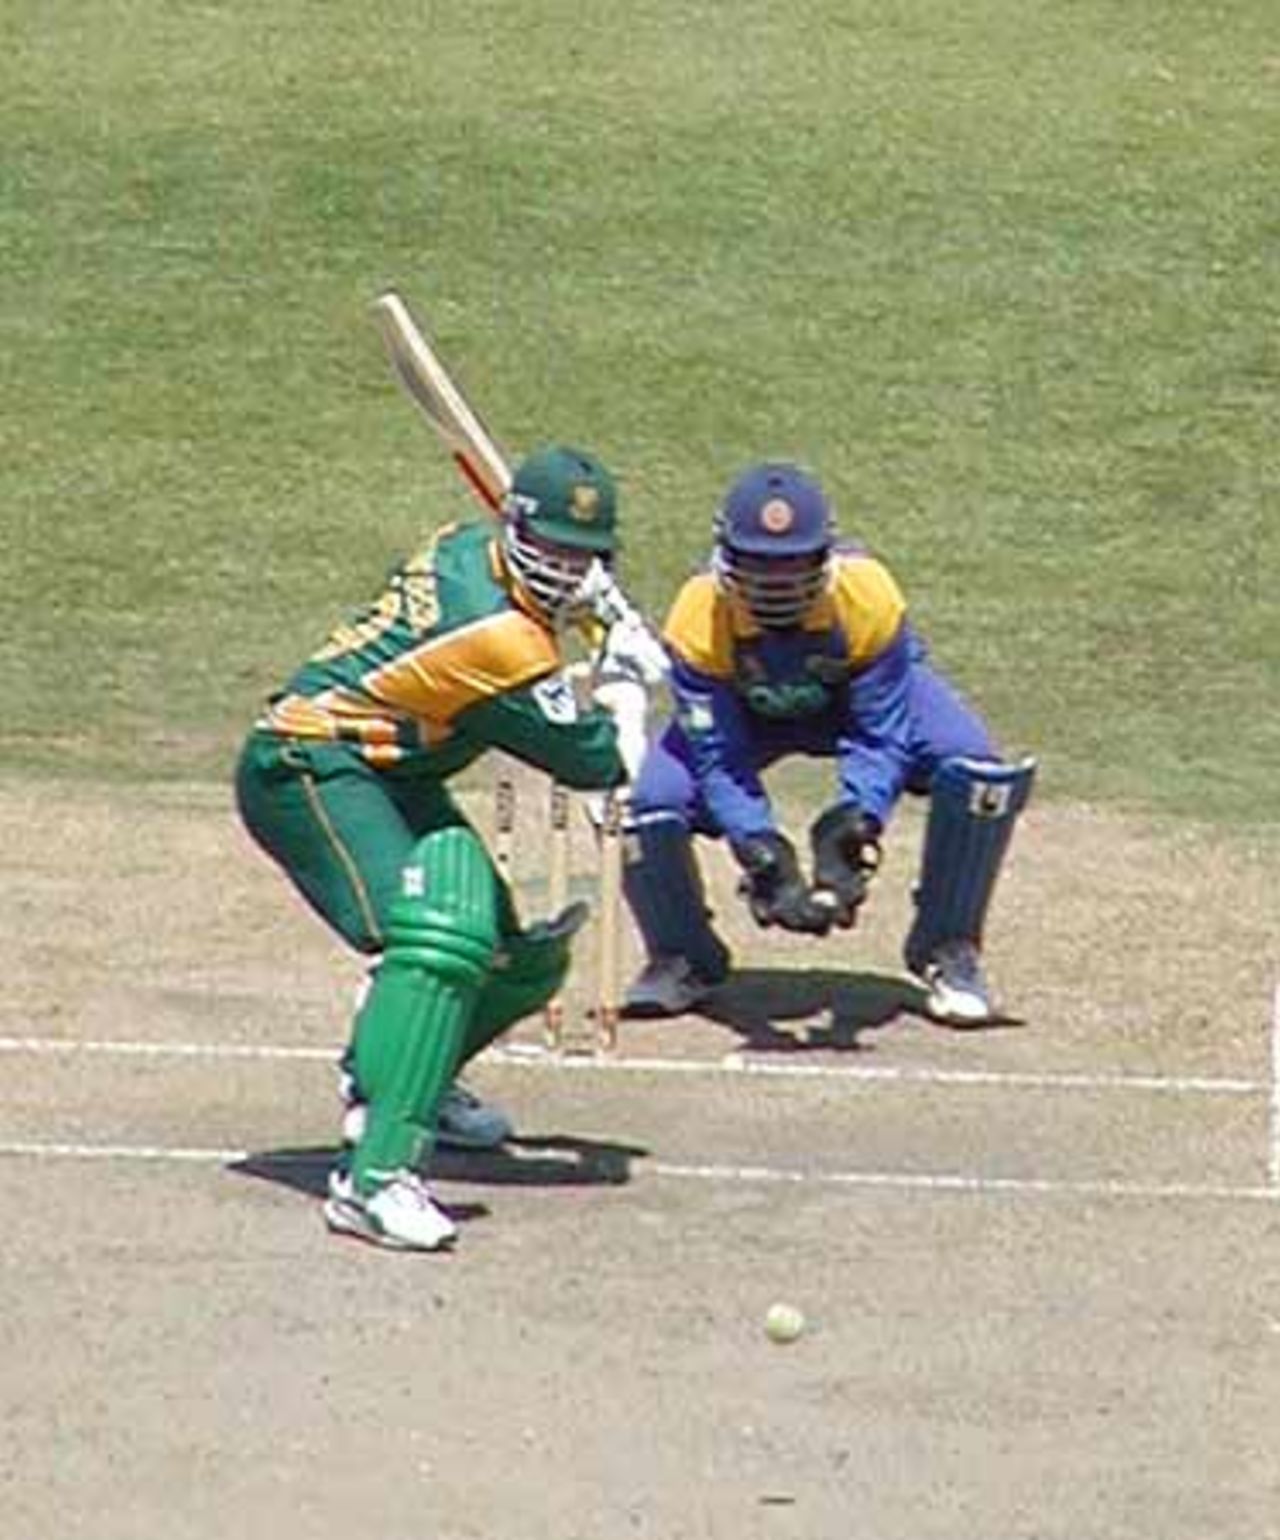 Klusener ready to hit, Morocco Cup, 6th ODI at Tangiers, South Africa v Sri Lanka, 19 Aug 2002